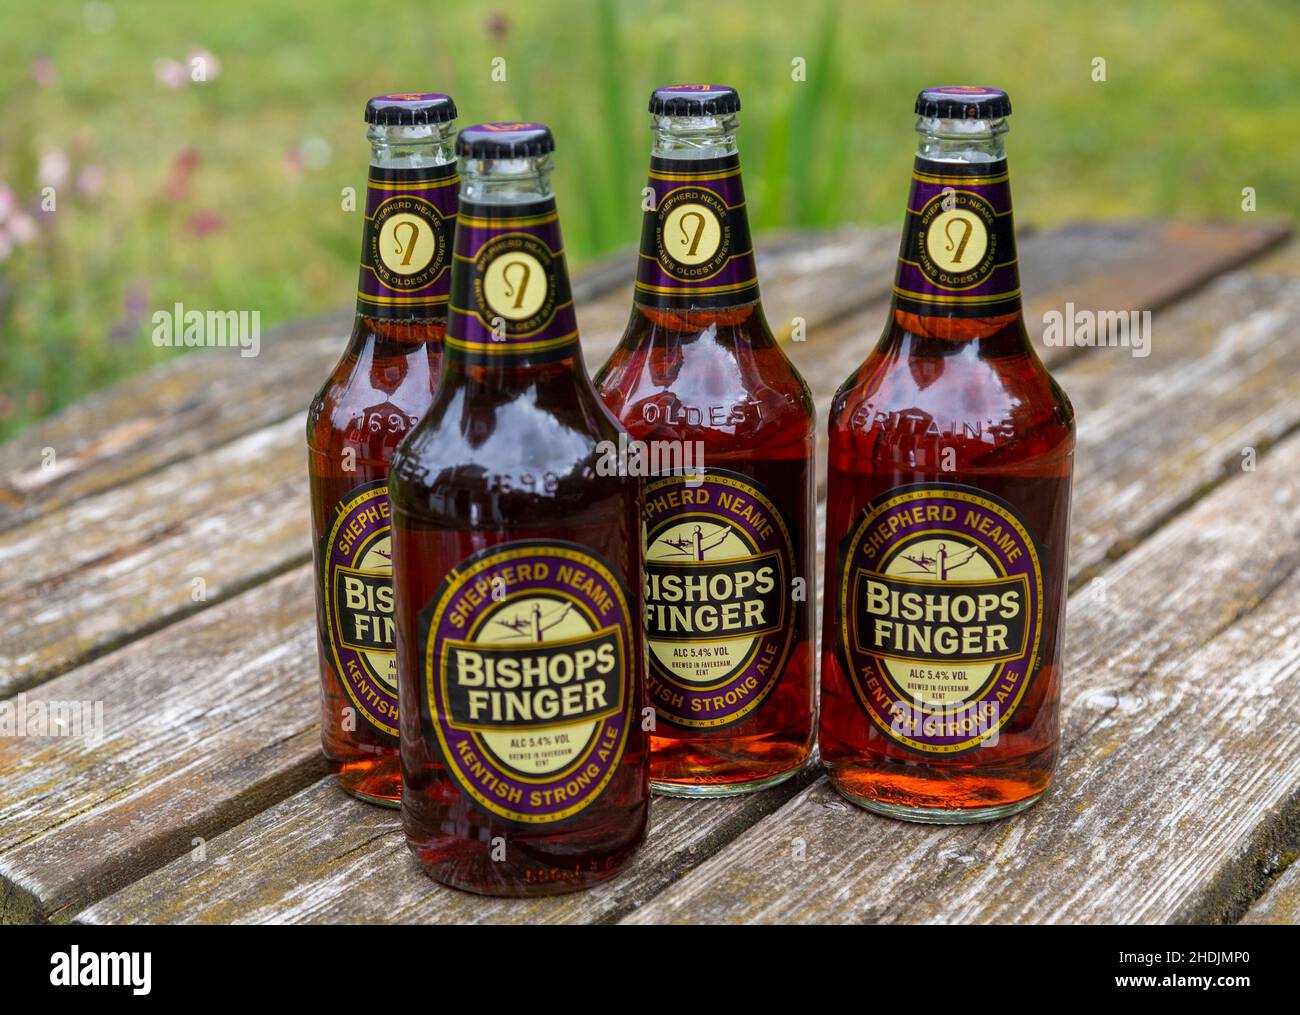 Four bottles of Bishops Finger Kentish strong ale brewed by Shepherd Neame, UK 5.4% alcohol content Stock Photo